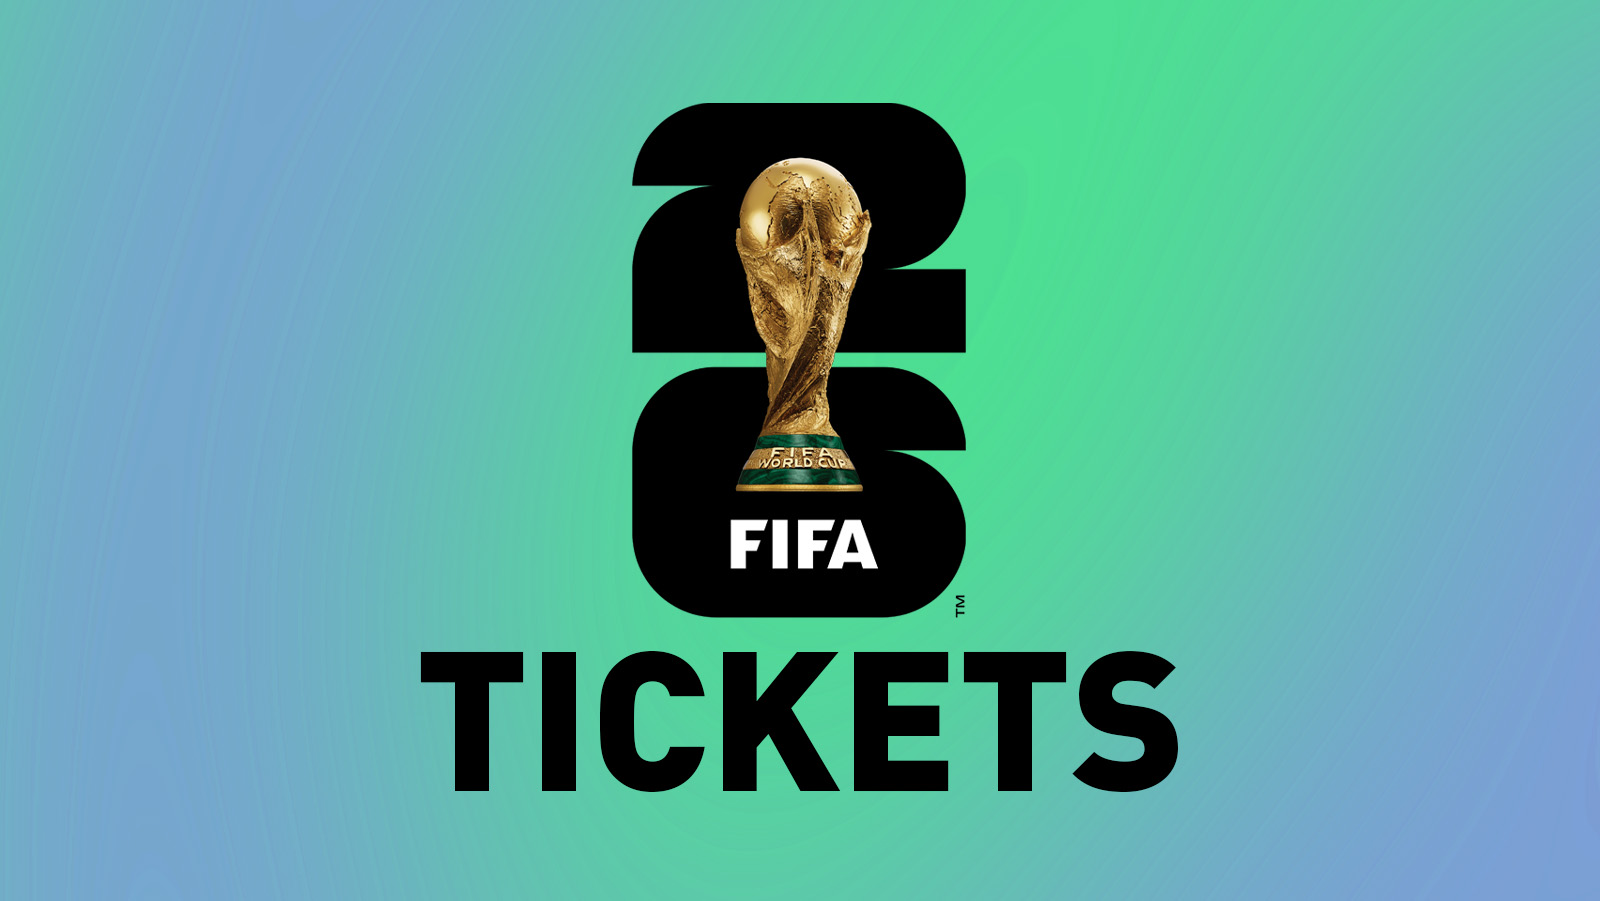 World Cup 2026 Tickets